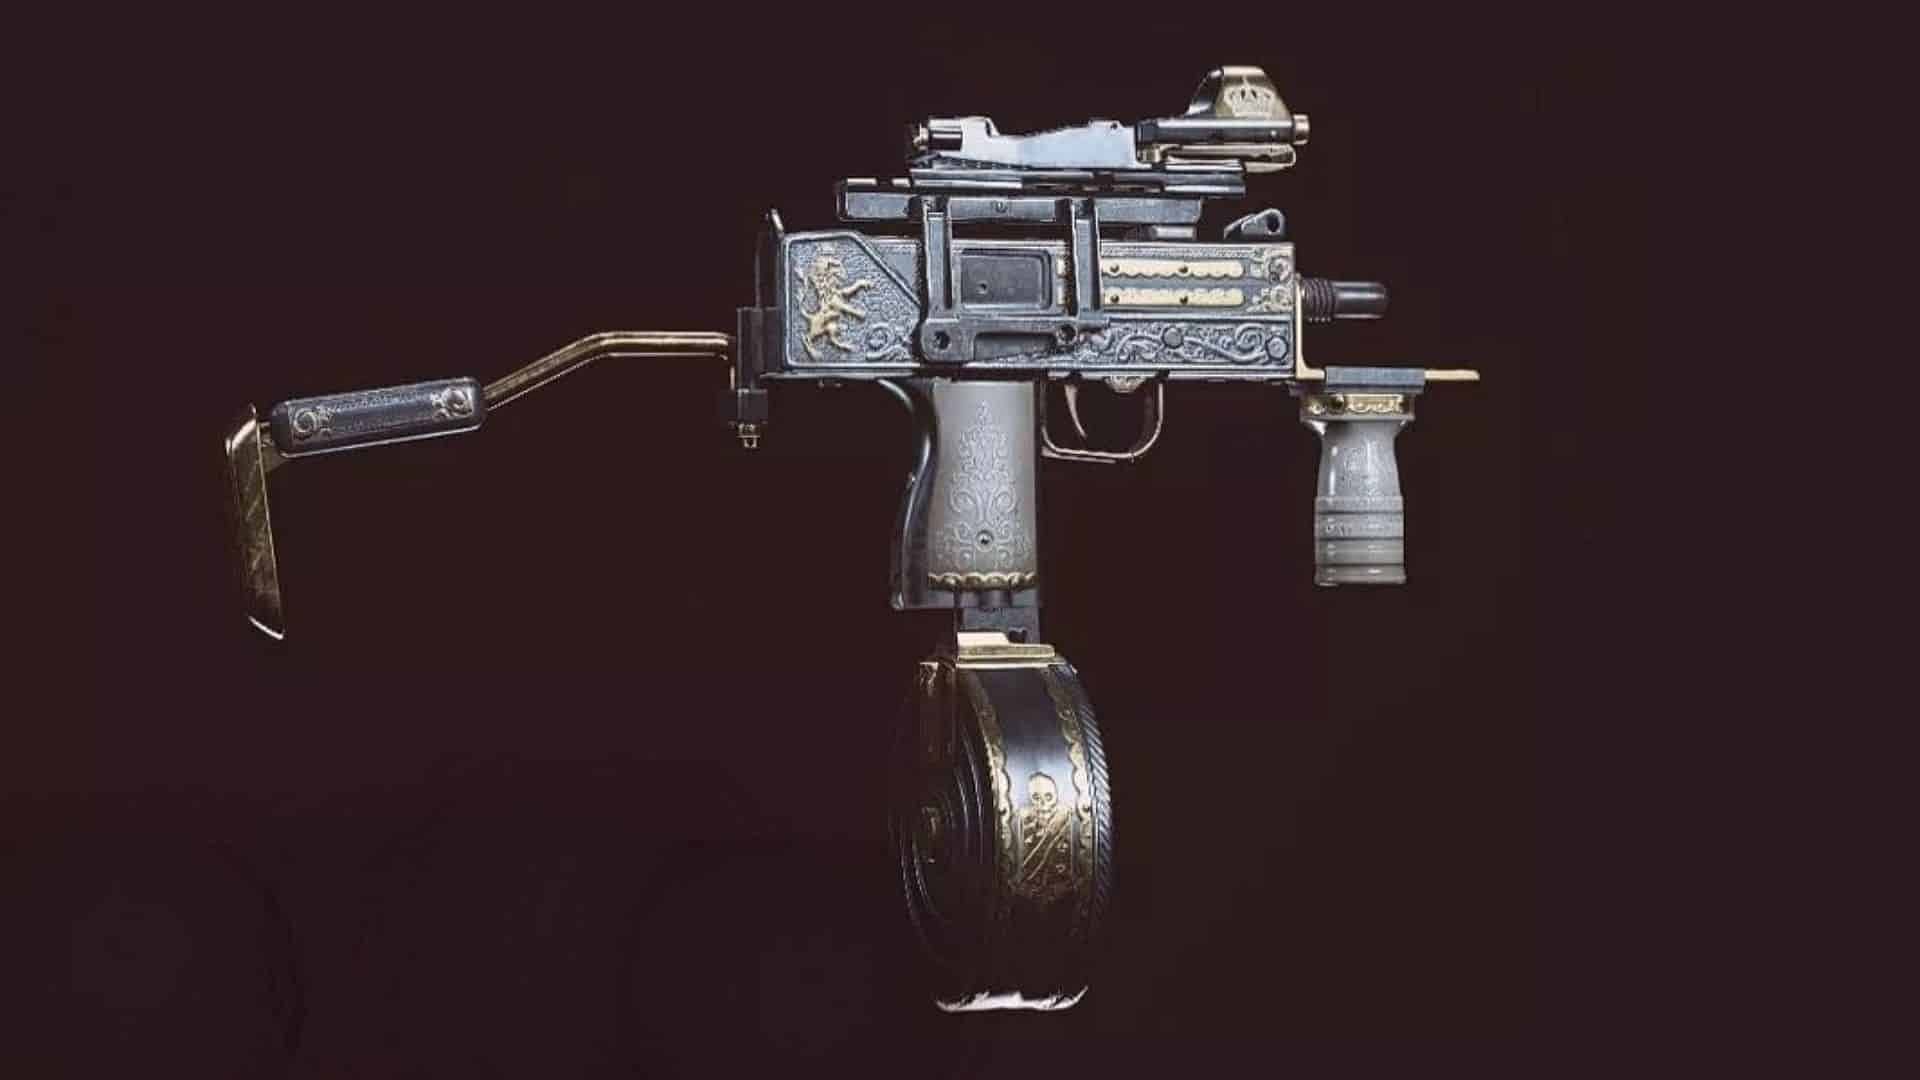 Leaks have revealed that Mac-10 is coming to COD Mobile next season, and it will also be getting a legendary blueprint (Image via Activision)